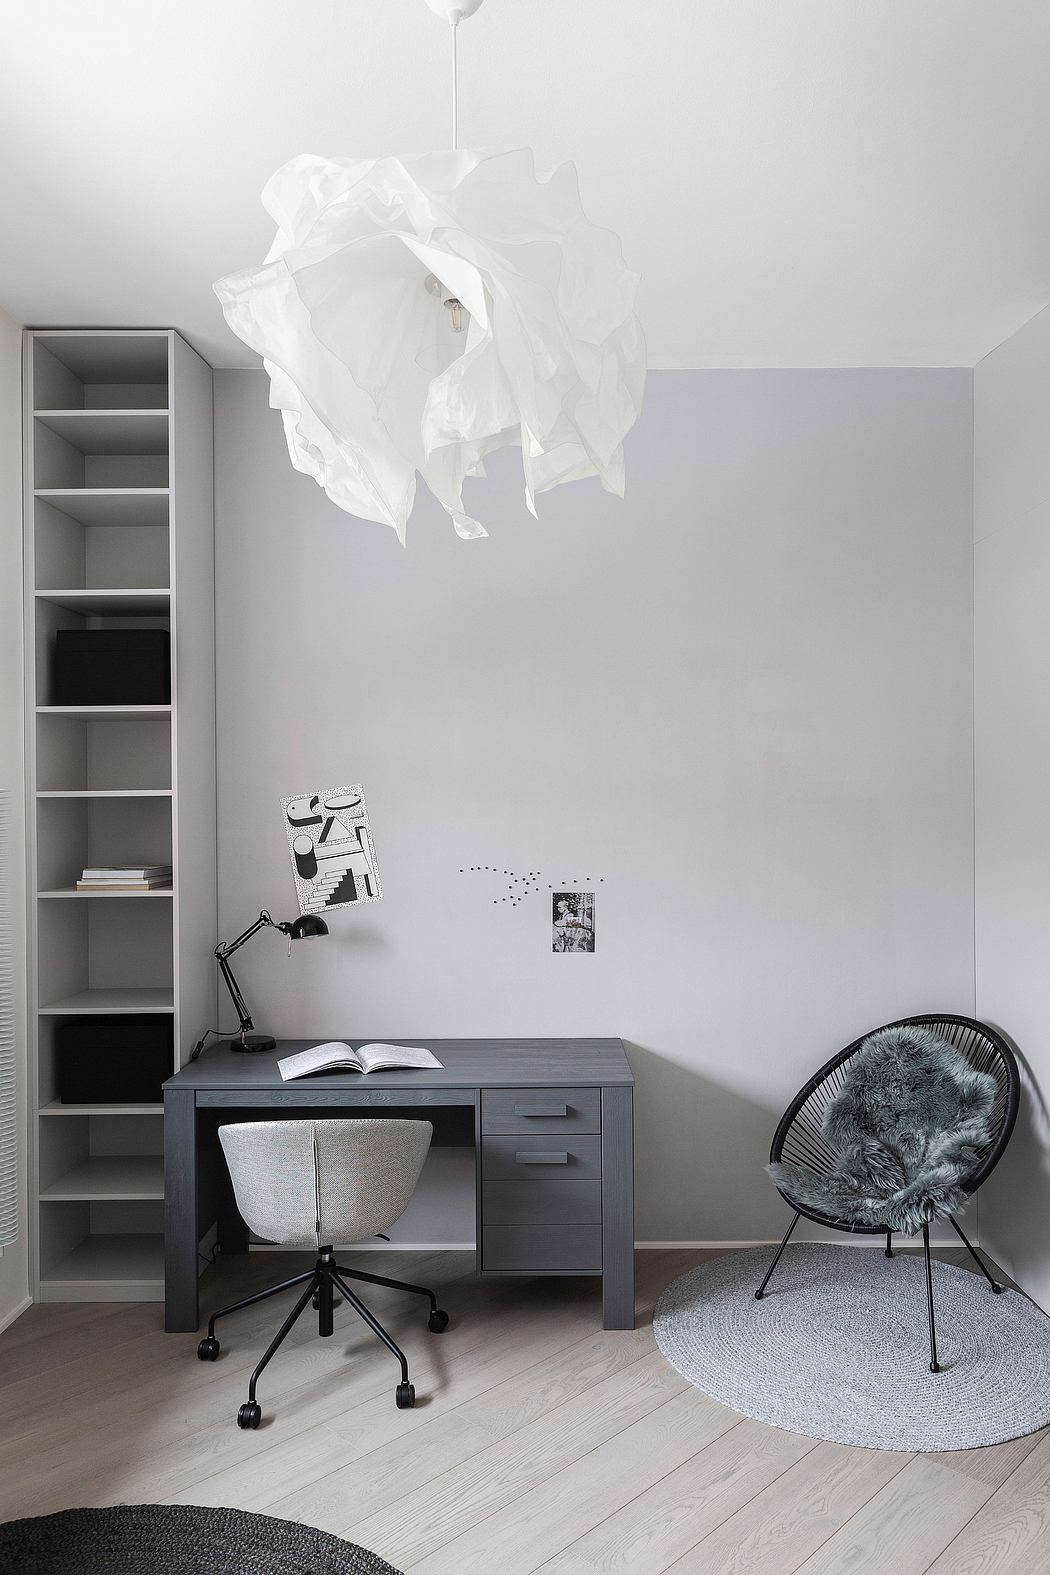 A minimalist home office with a gray desk, shelving, and a fur-covered chair.